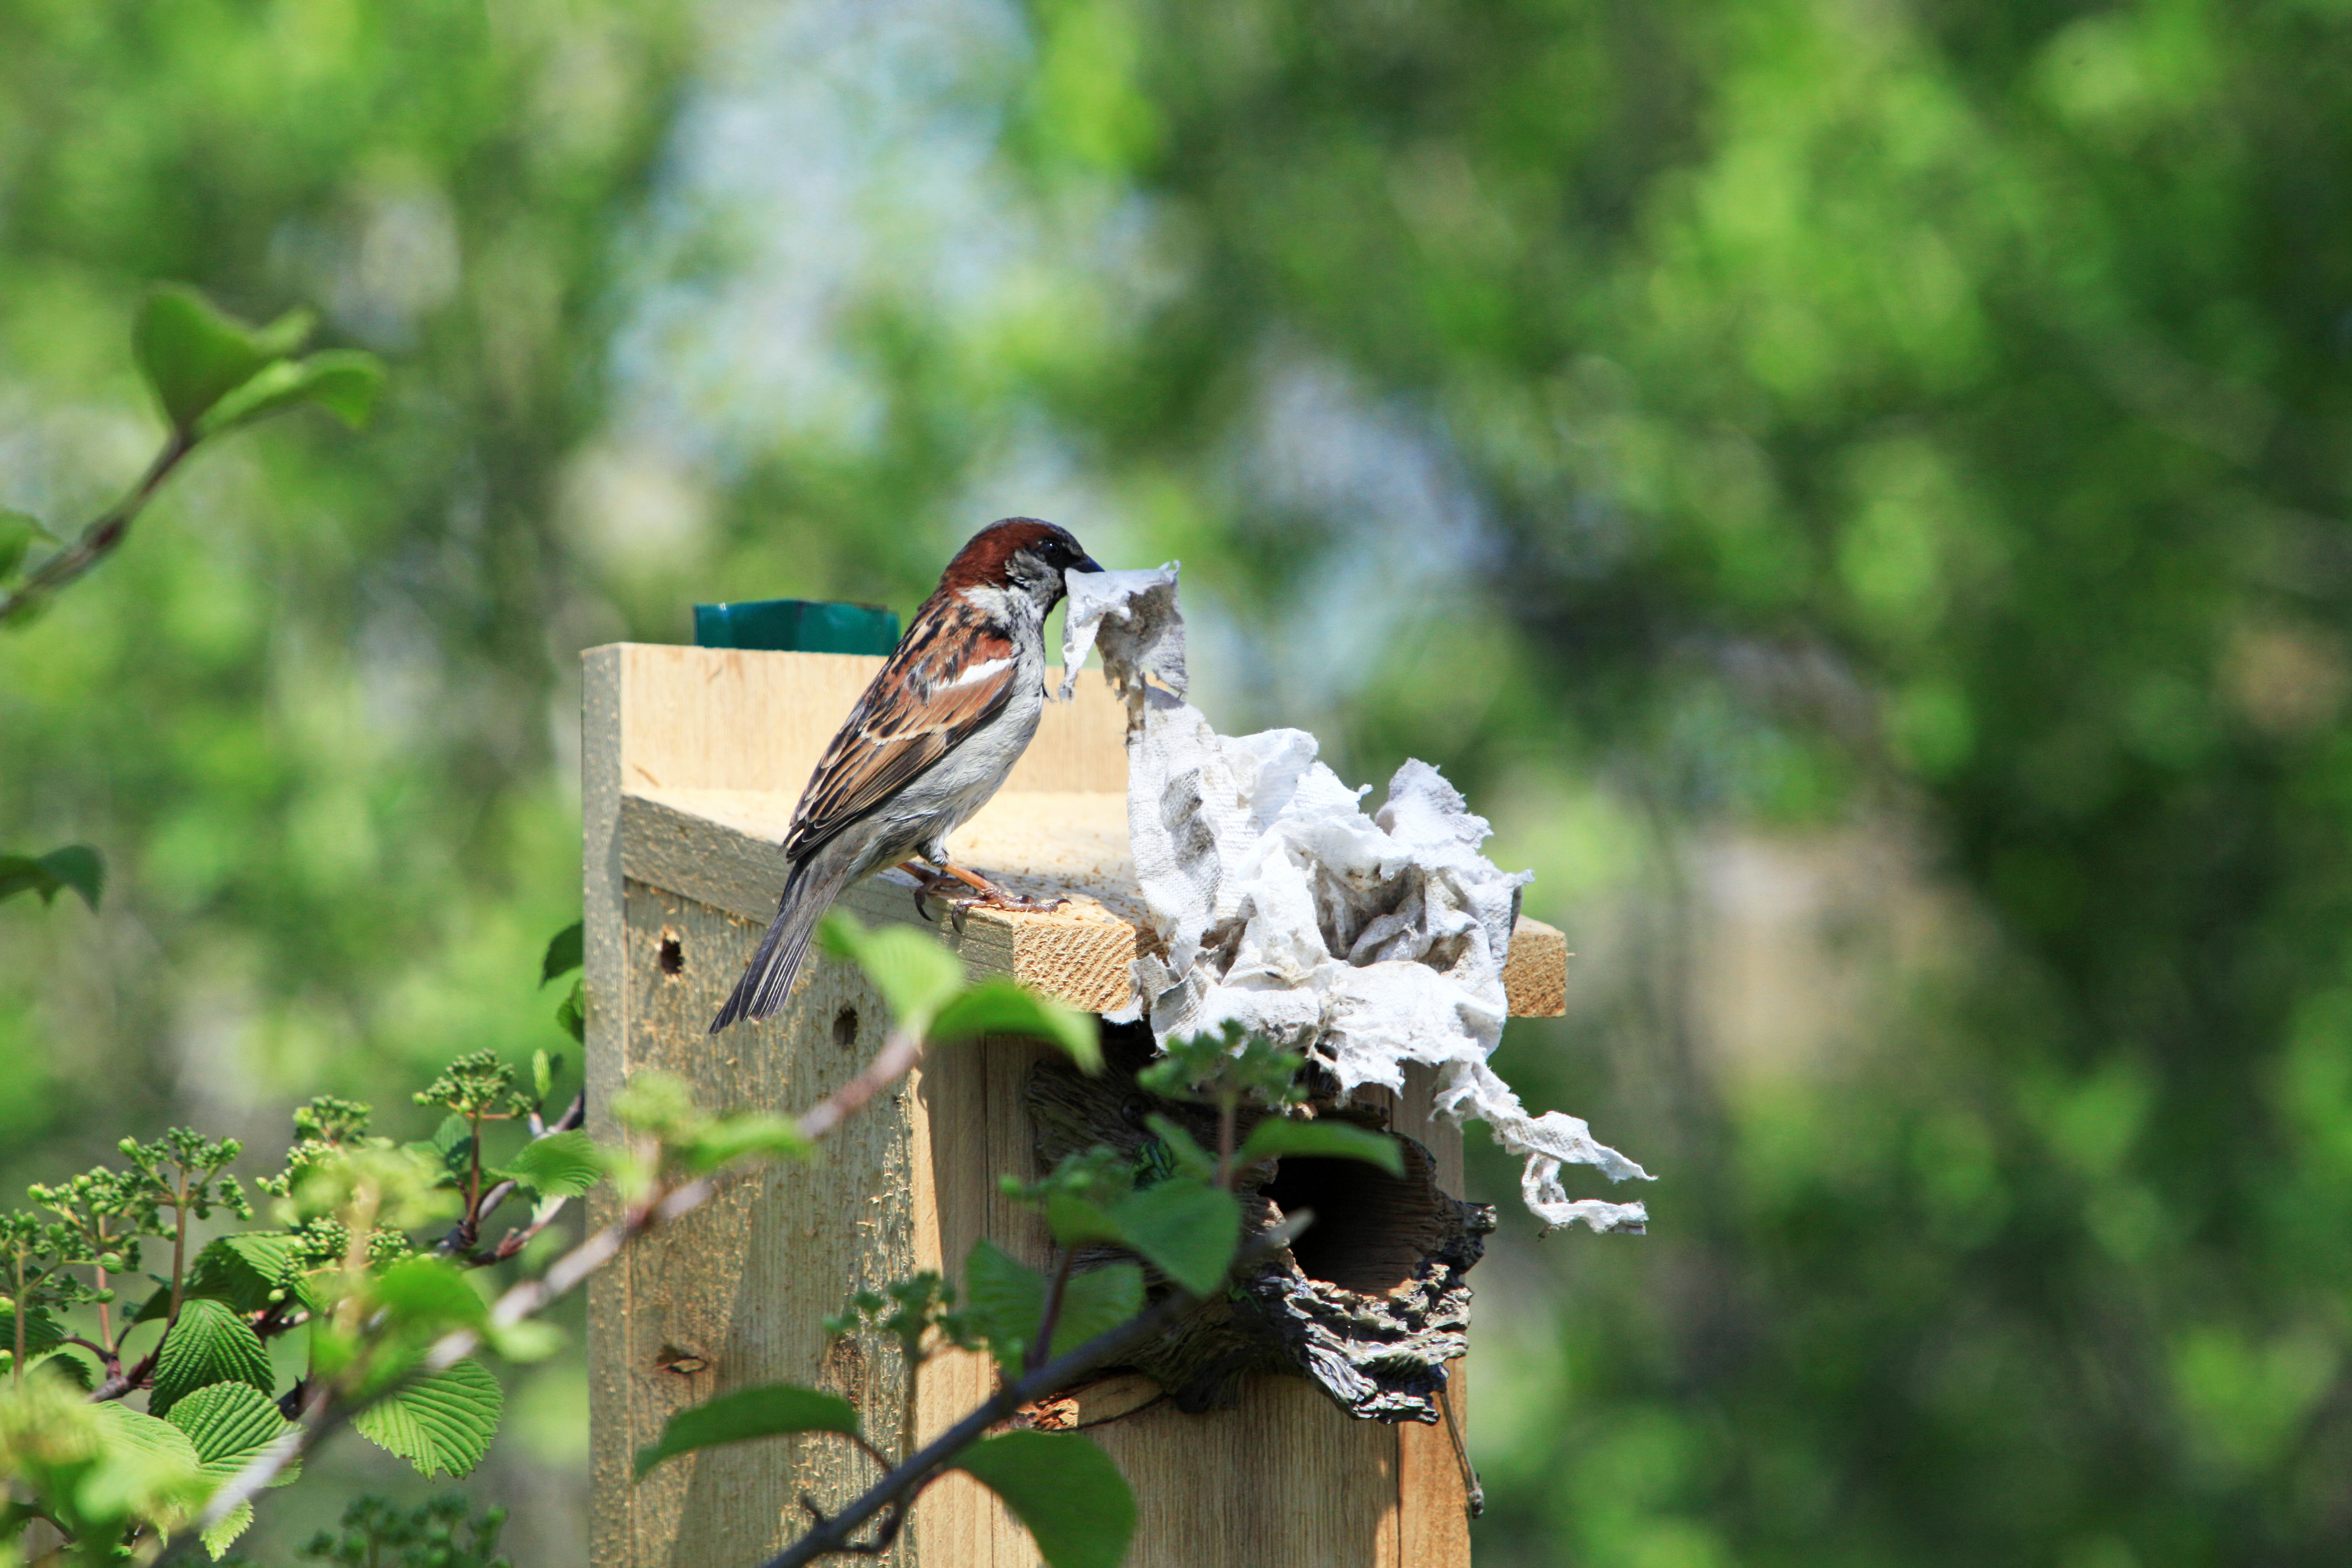 File:Sparrow nest with tissue 1.jpg - Wikimedia Commons